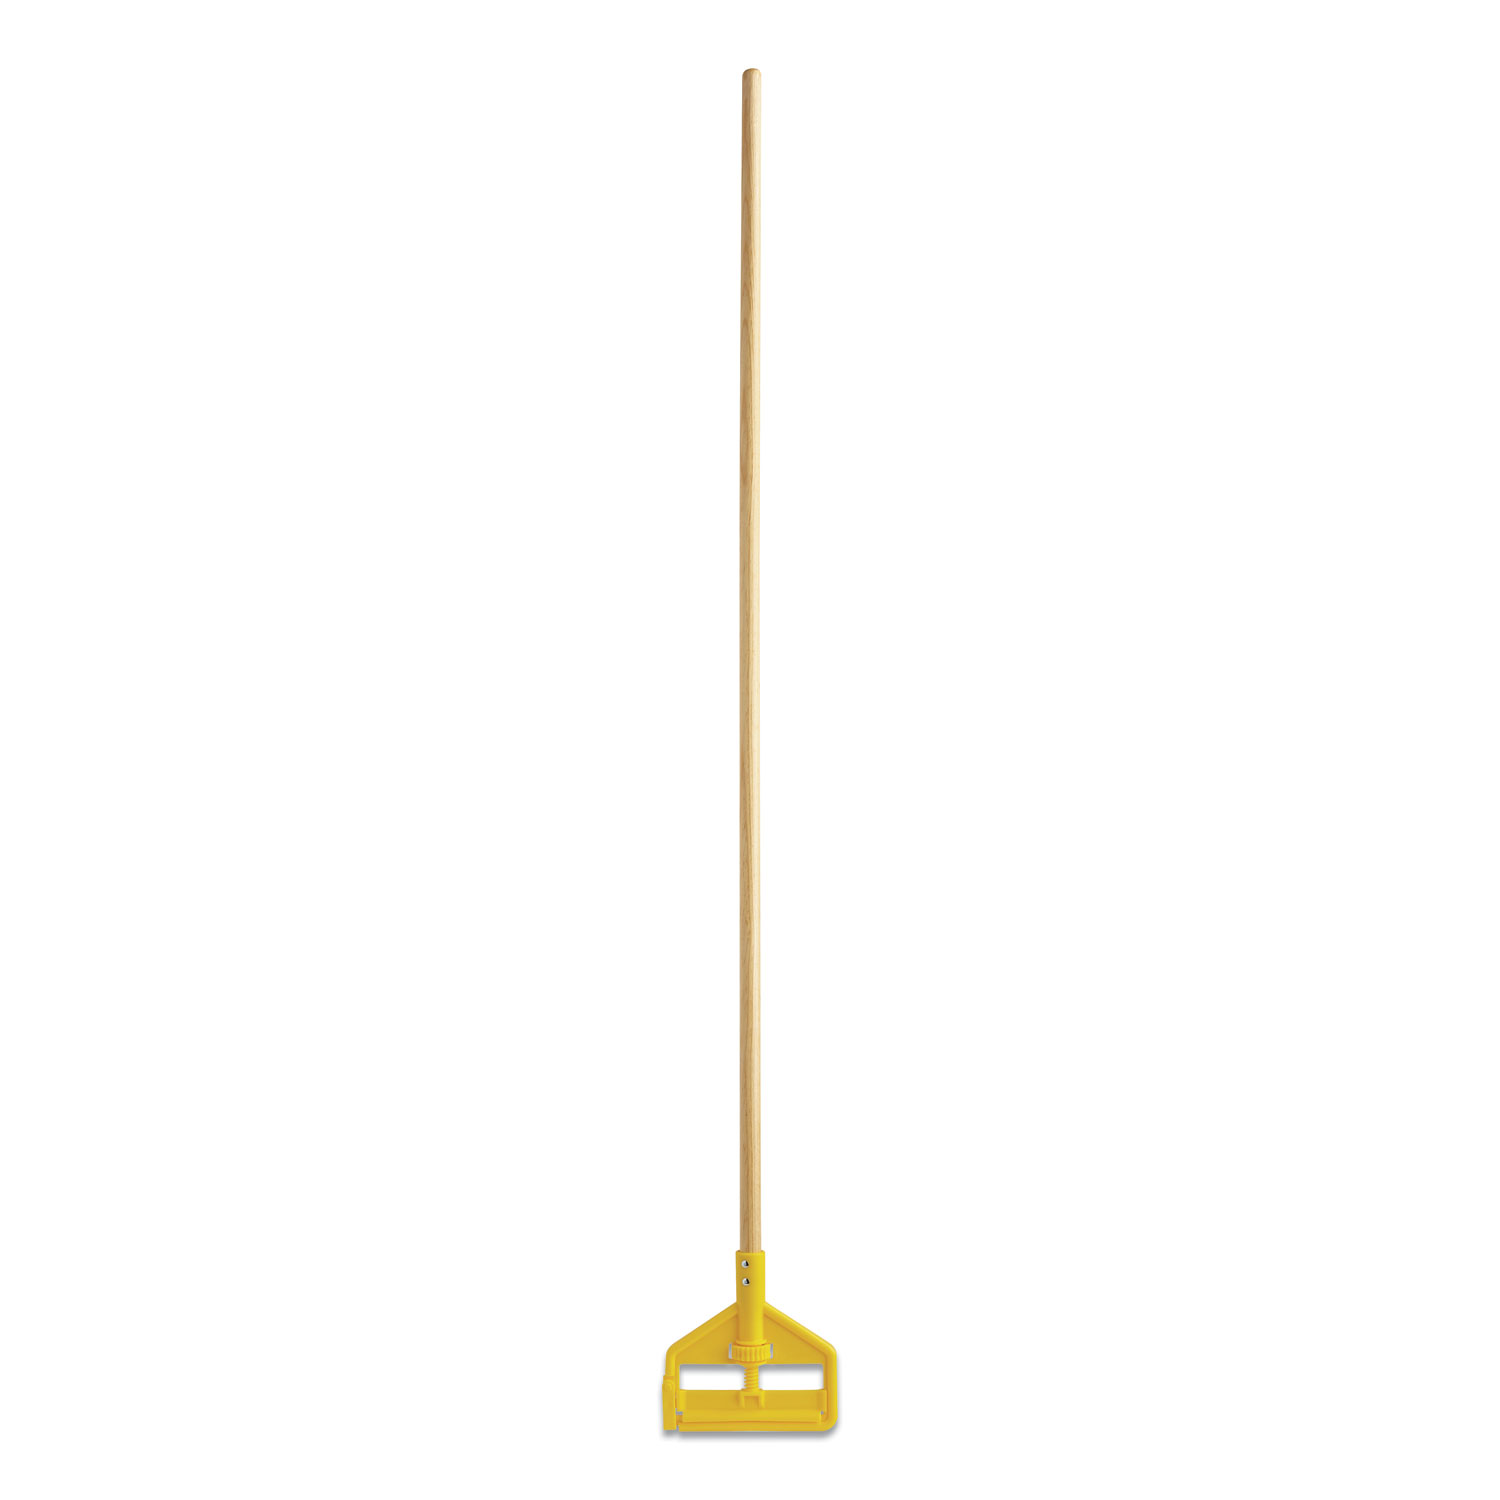 Rubbermaid rcph116 Invader side gate wood wet mop